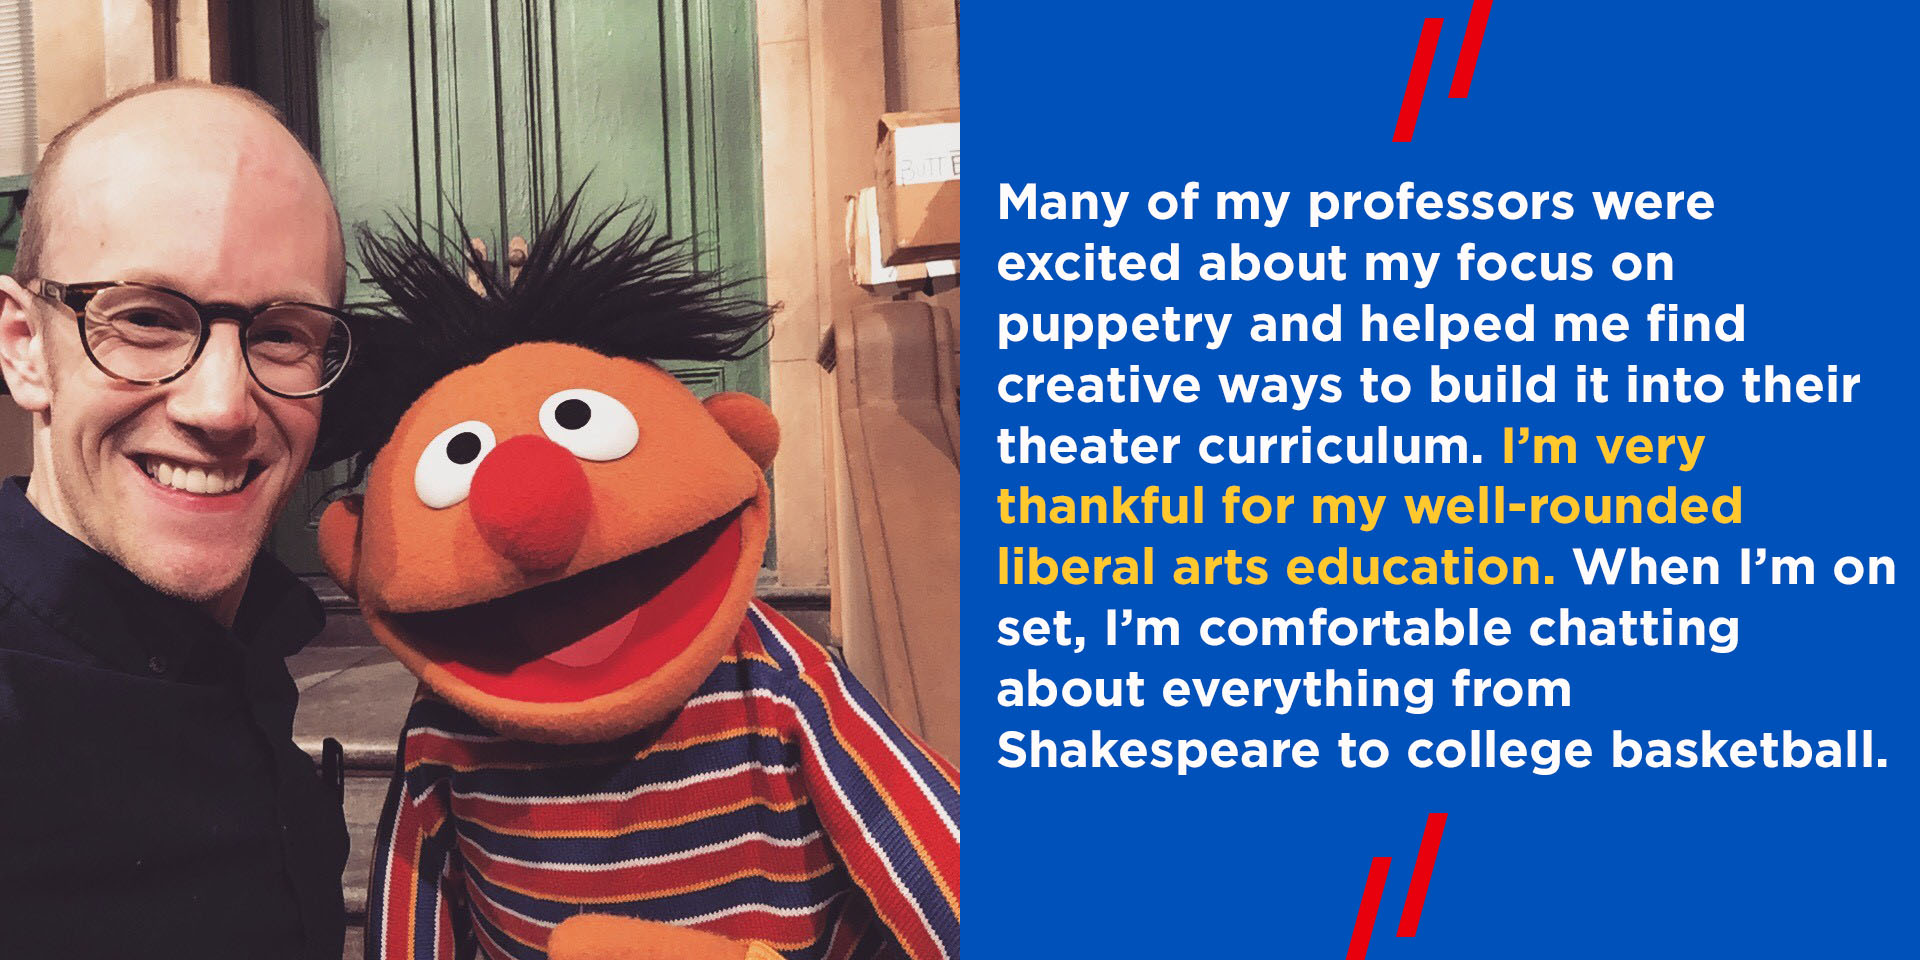 "Many of my professors were excited about my focus on puppetry and helped me find creative ways to build it into their theater curriculum. I’m very thankful for my well-rounded liberal arts education. When I’m on set, I’m comfortable chatting about everything from Shakespeare to college basketball. "